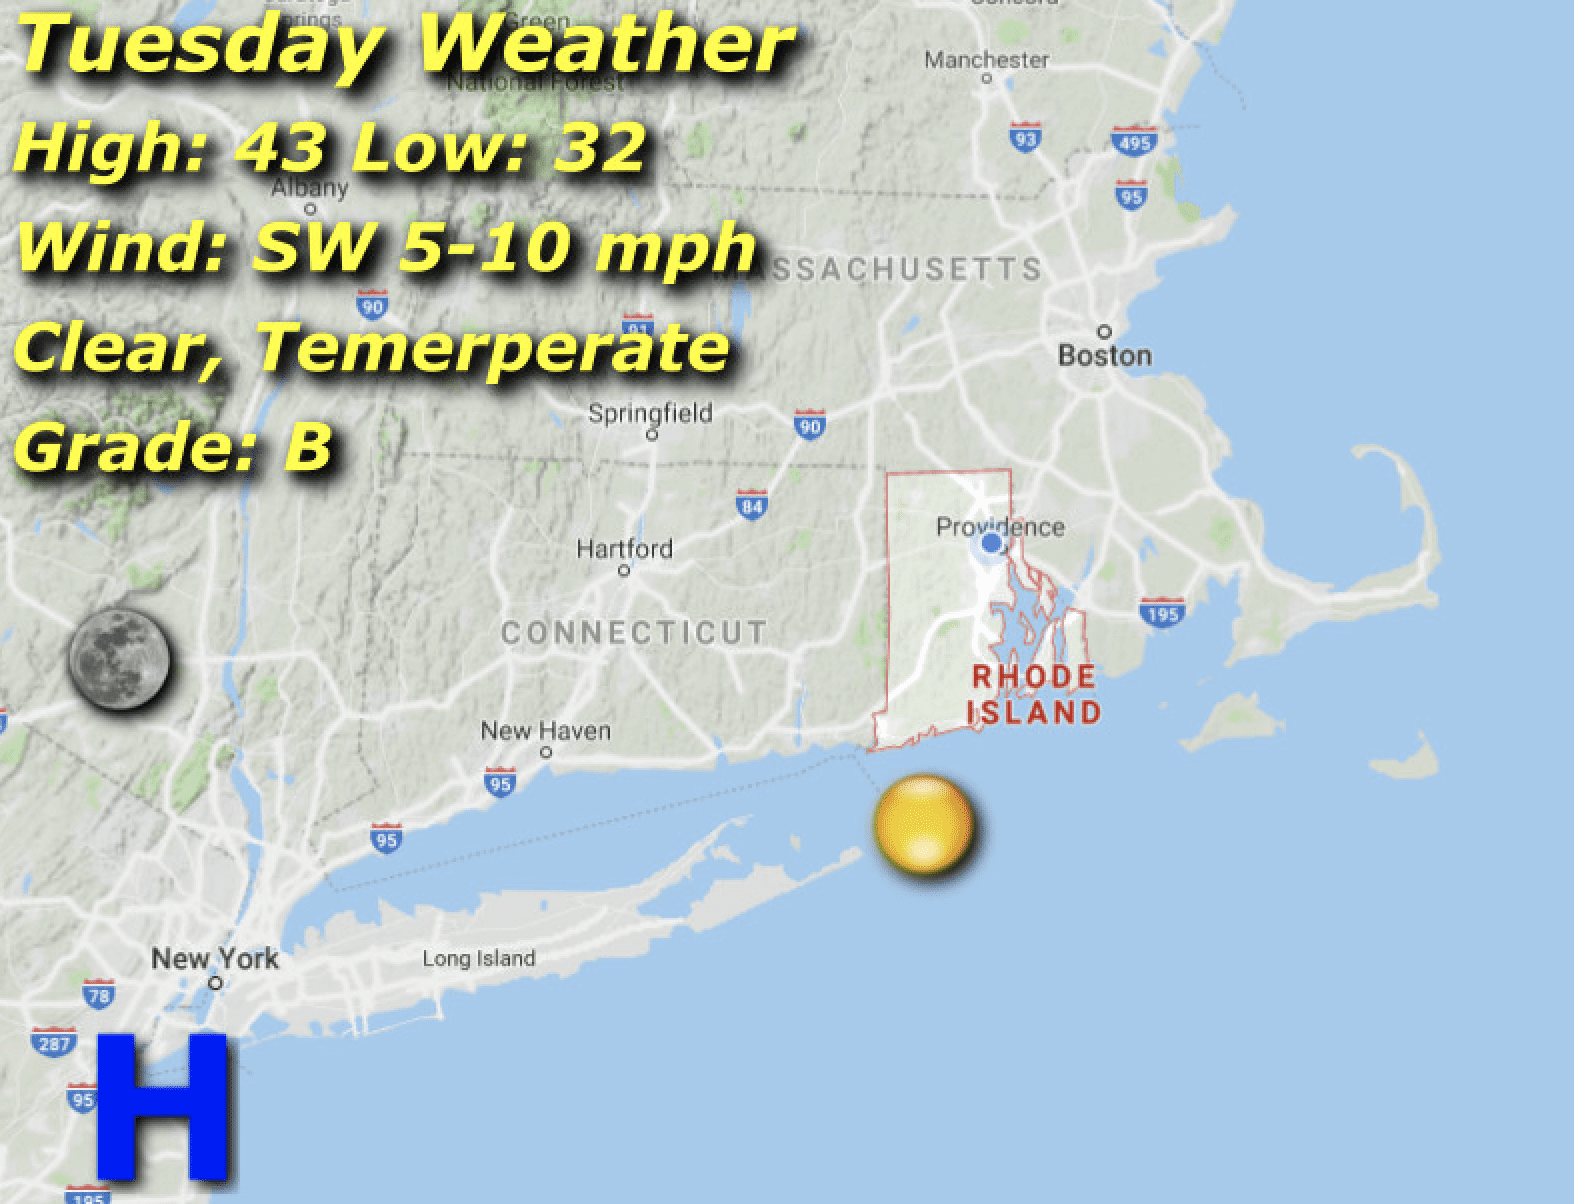 Tuesday weather map in Rhode Island.